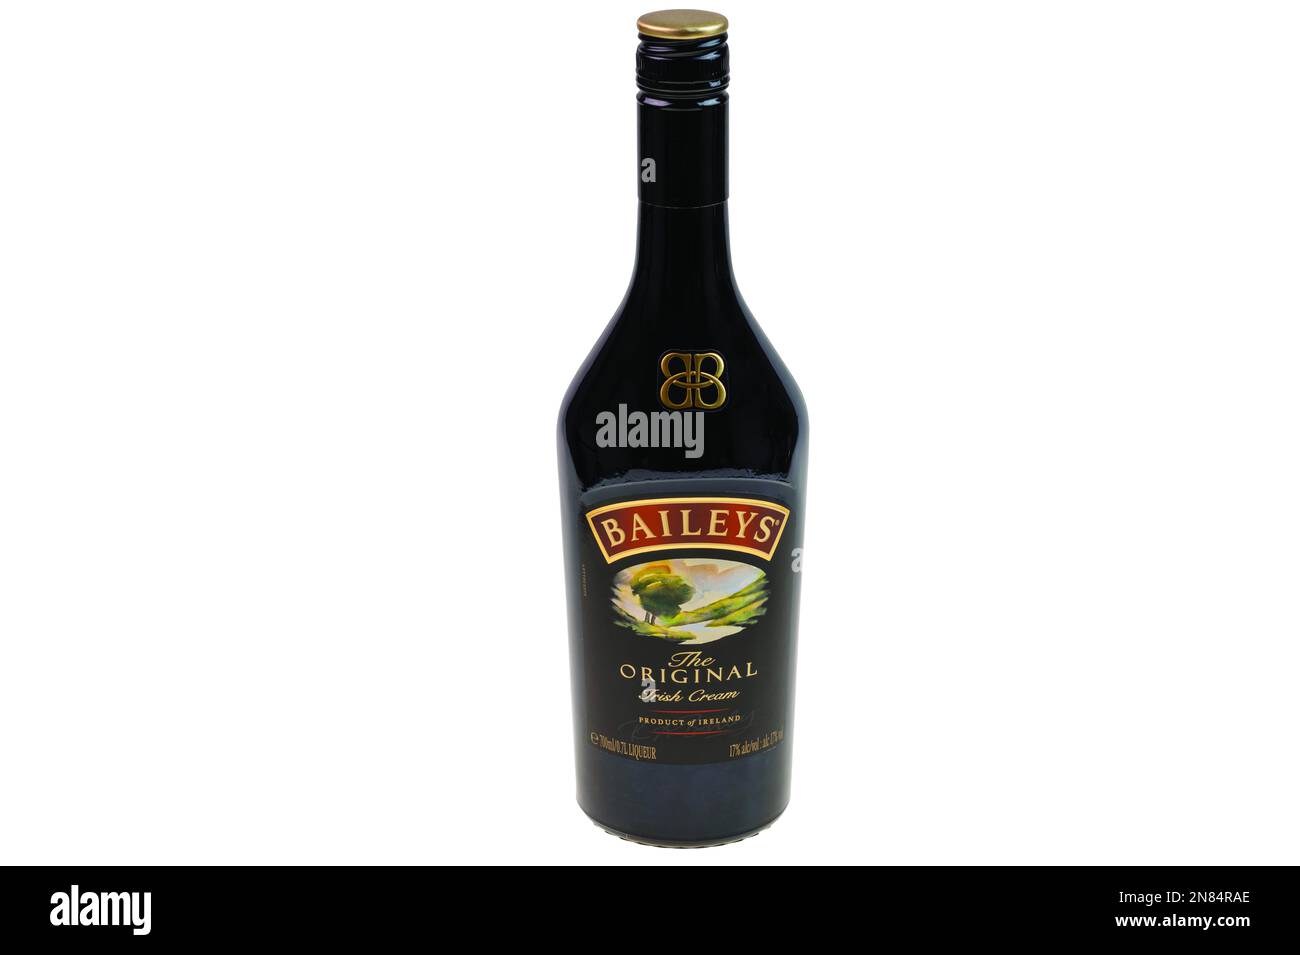 Close up view of Baileys liquor bottle isolated on white background. Sweden. Stock Photo